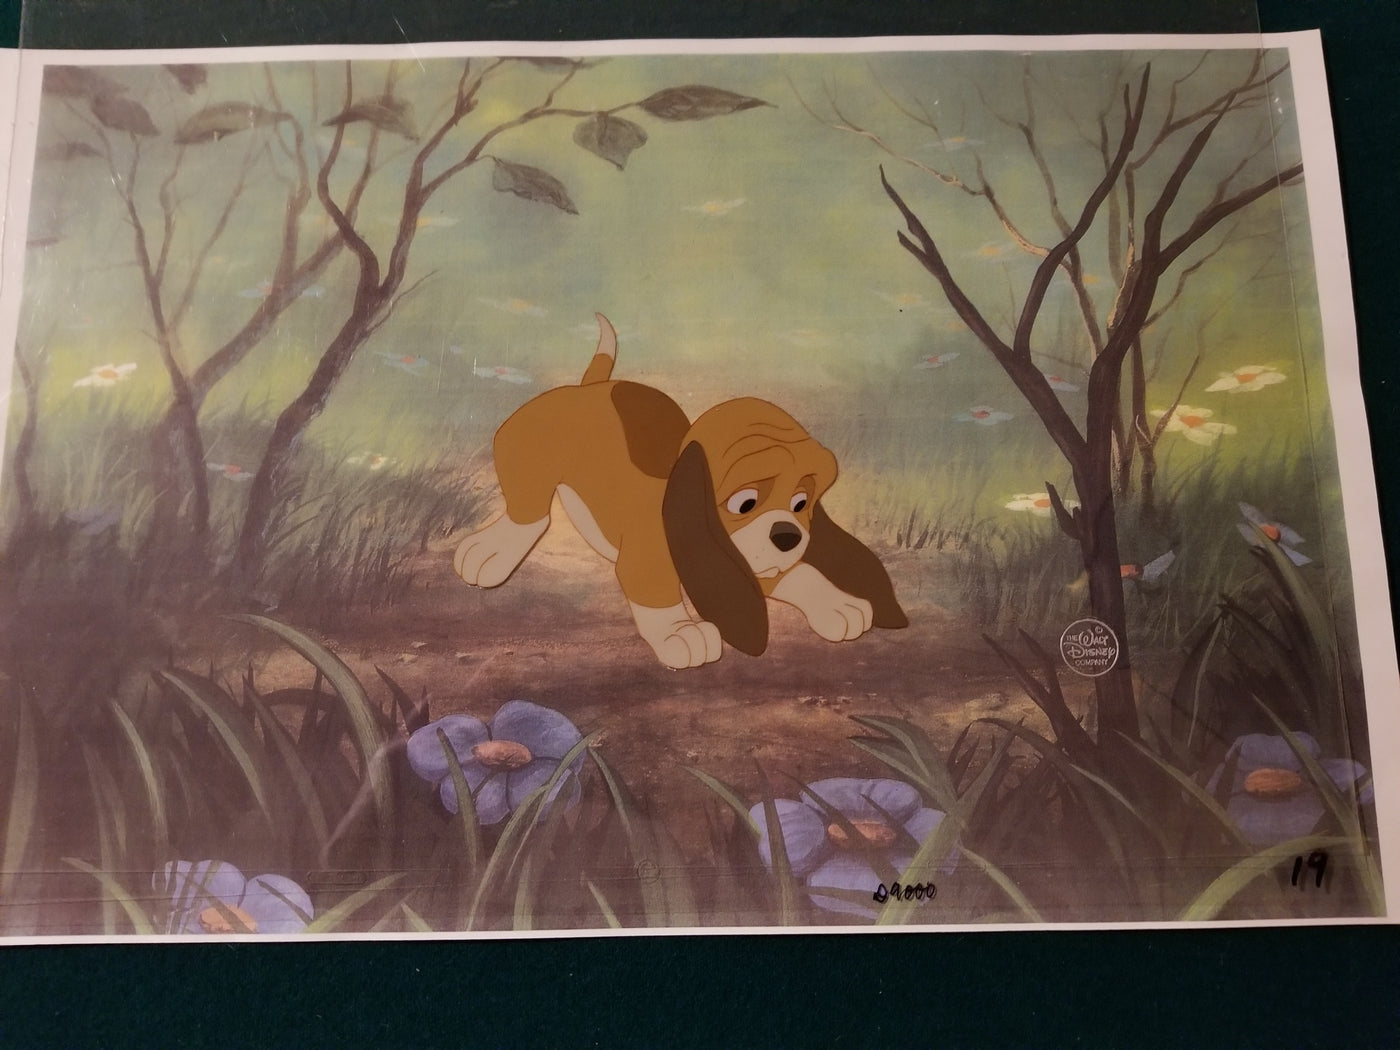 Original Walt Disney Production Cel from The Fox and the Hound featuring Copper